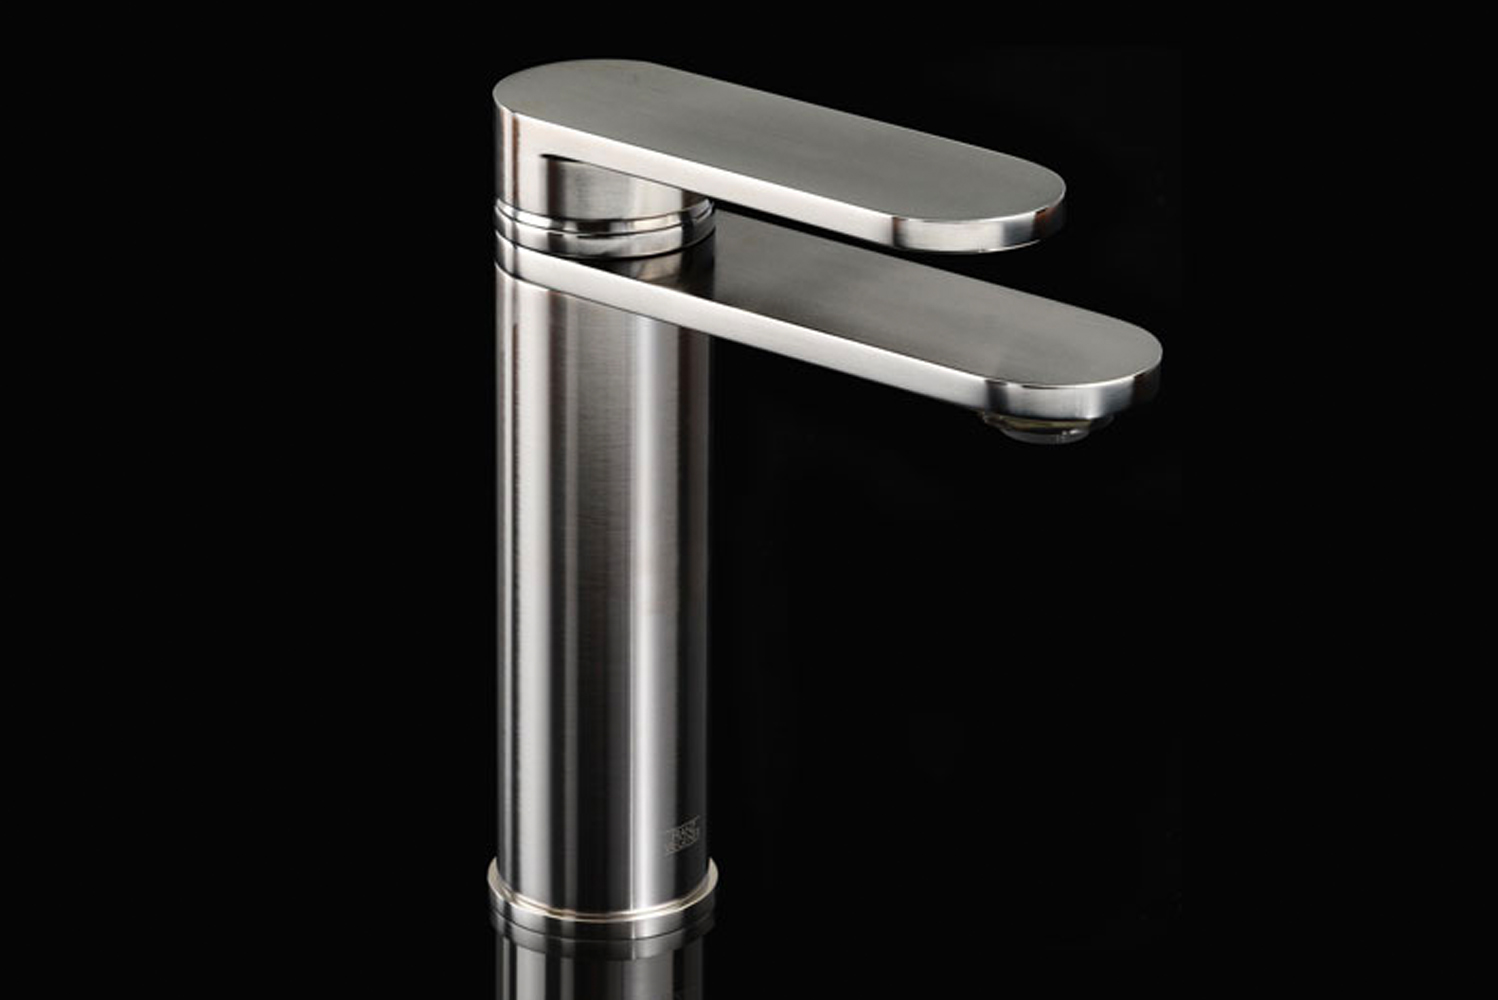 Introducing Seven the newest addition to Franz Viegeners collection of sculptural bath fittings